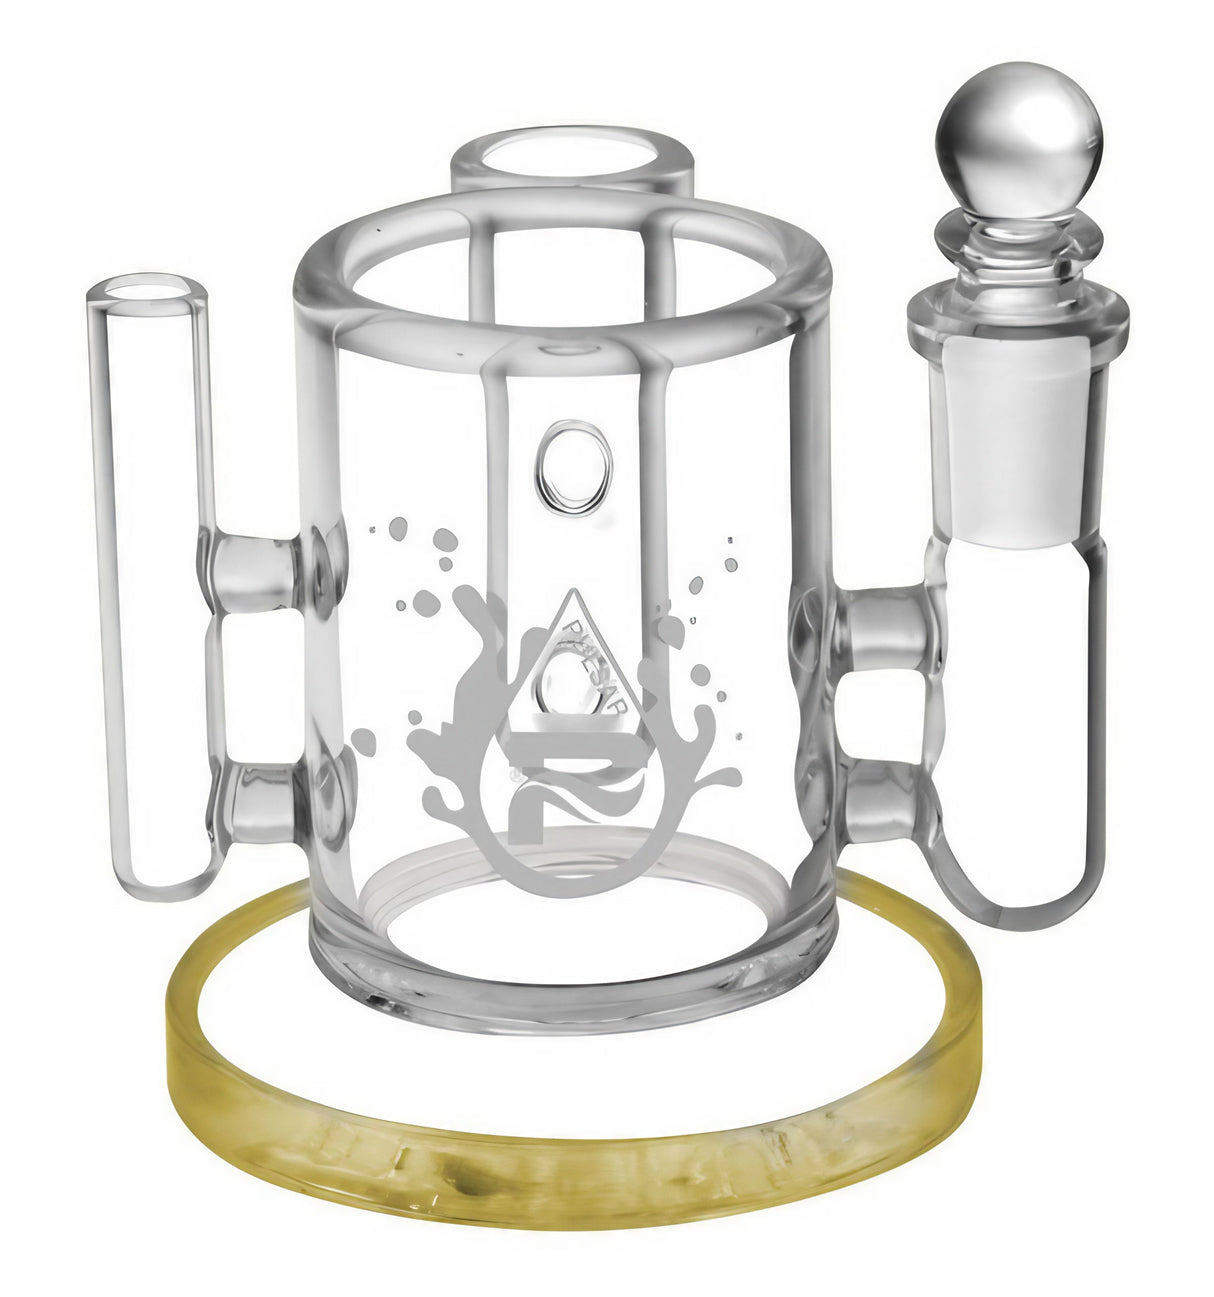 Pulsar Isopropyl Cleaning Station for Dab Gear, Borosilicate Glass, Assorted Colors